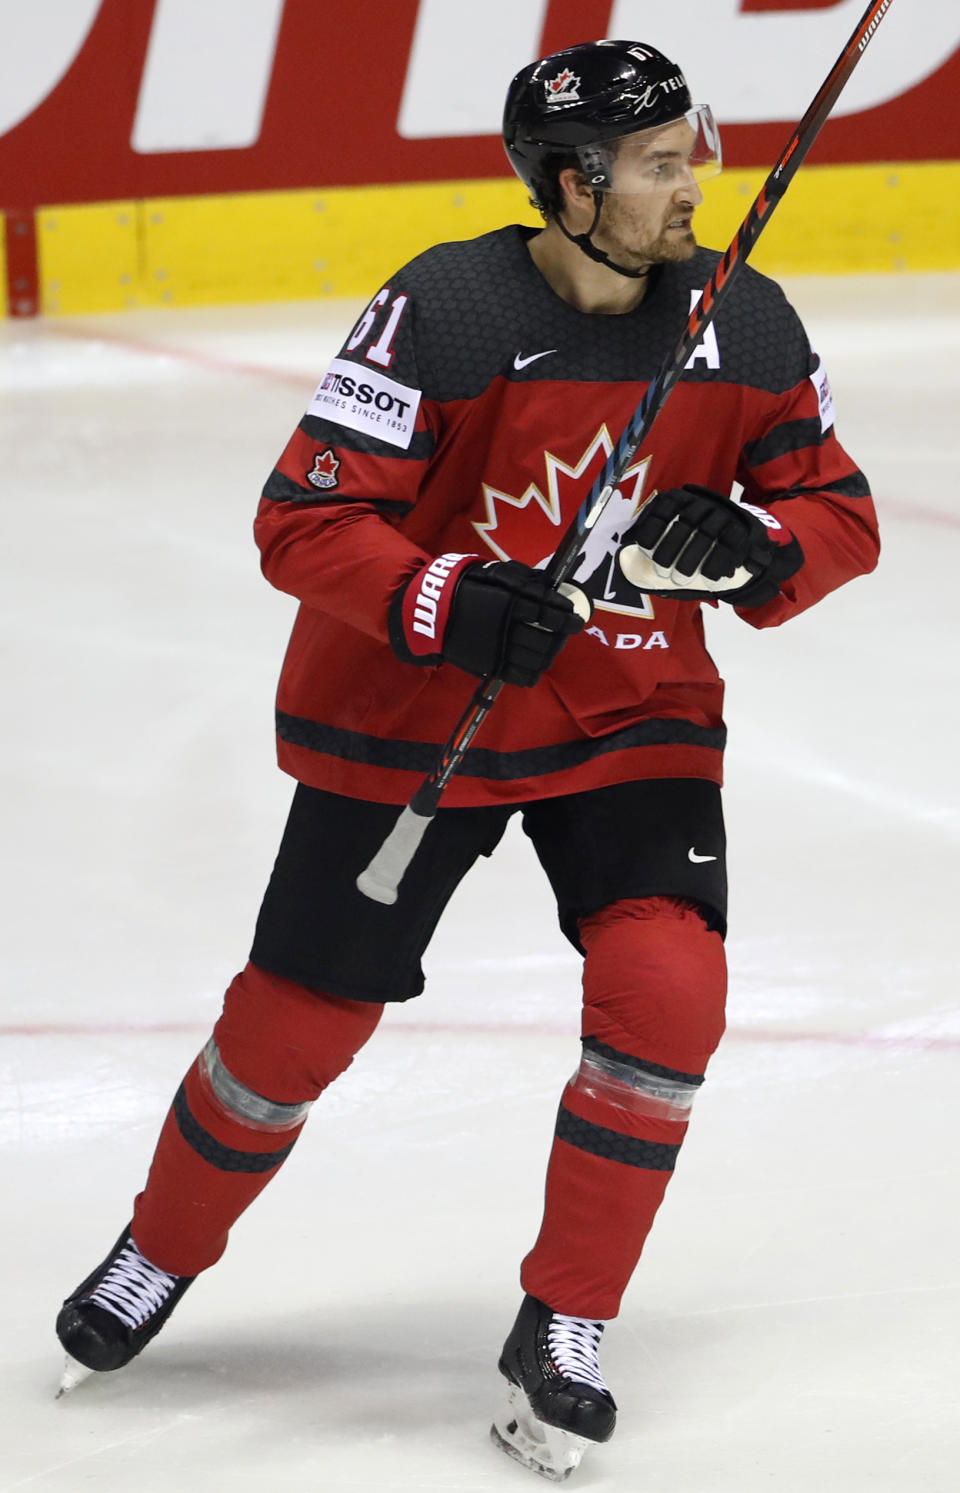 Canada's Mark Stone celebrates after scoring his sides third goal during the Ice Hockey World Championships group A match between Canada and Germany at the Steel Arena in Kosice, Slovakia, Saturday, May 18, 2019. (AP Photo/Petr David Josek)